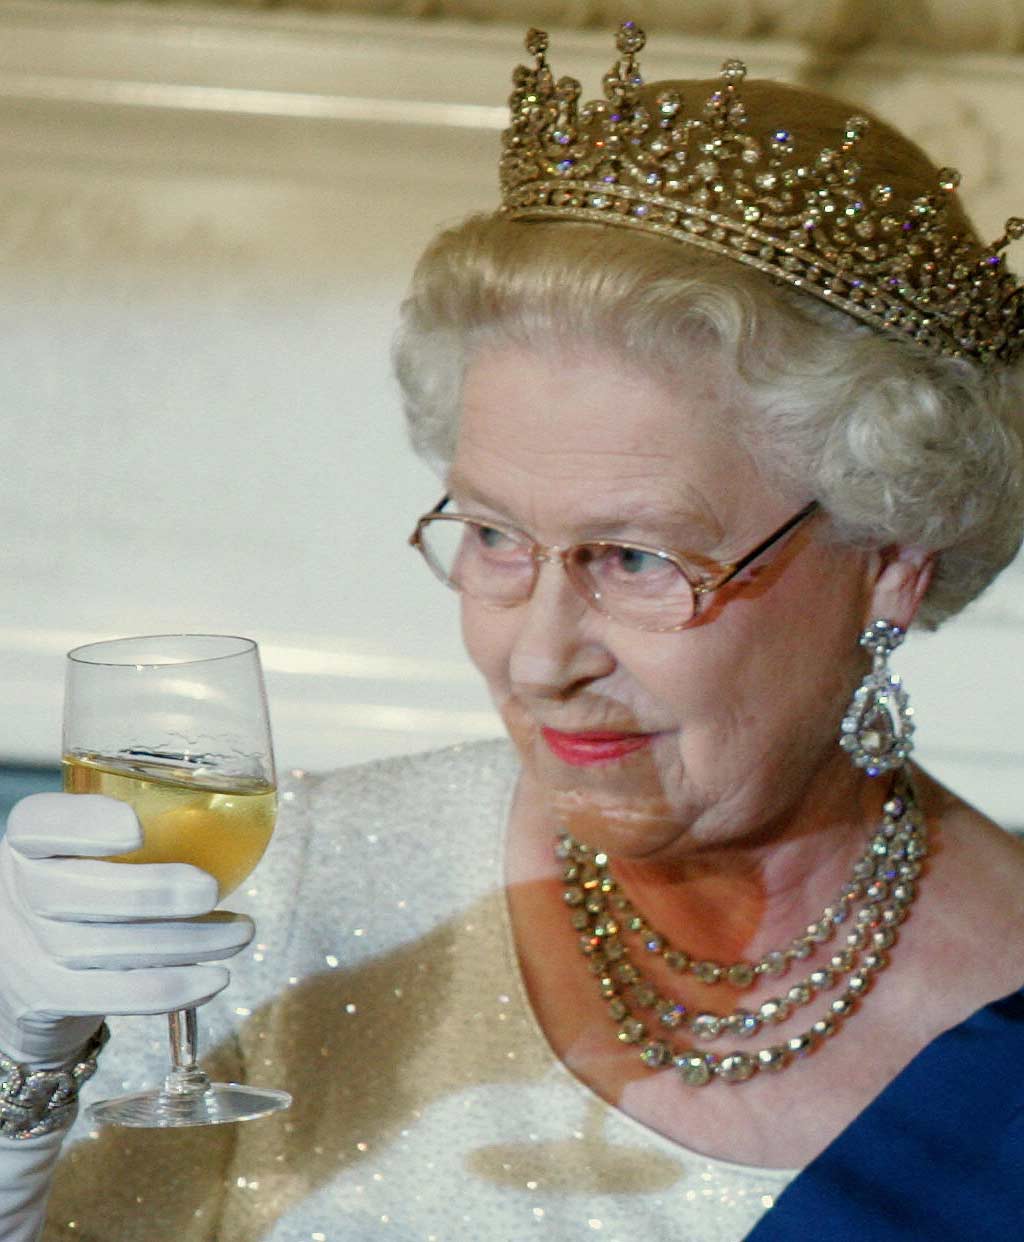 Queen Elizabeth cheering with a glass of wine